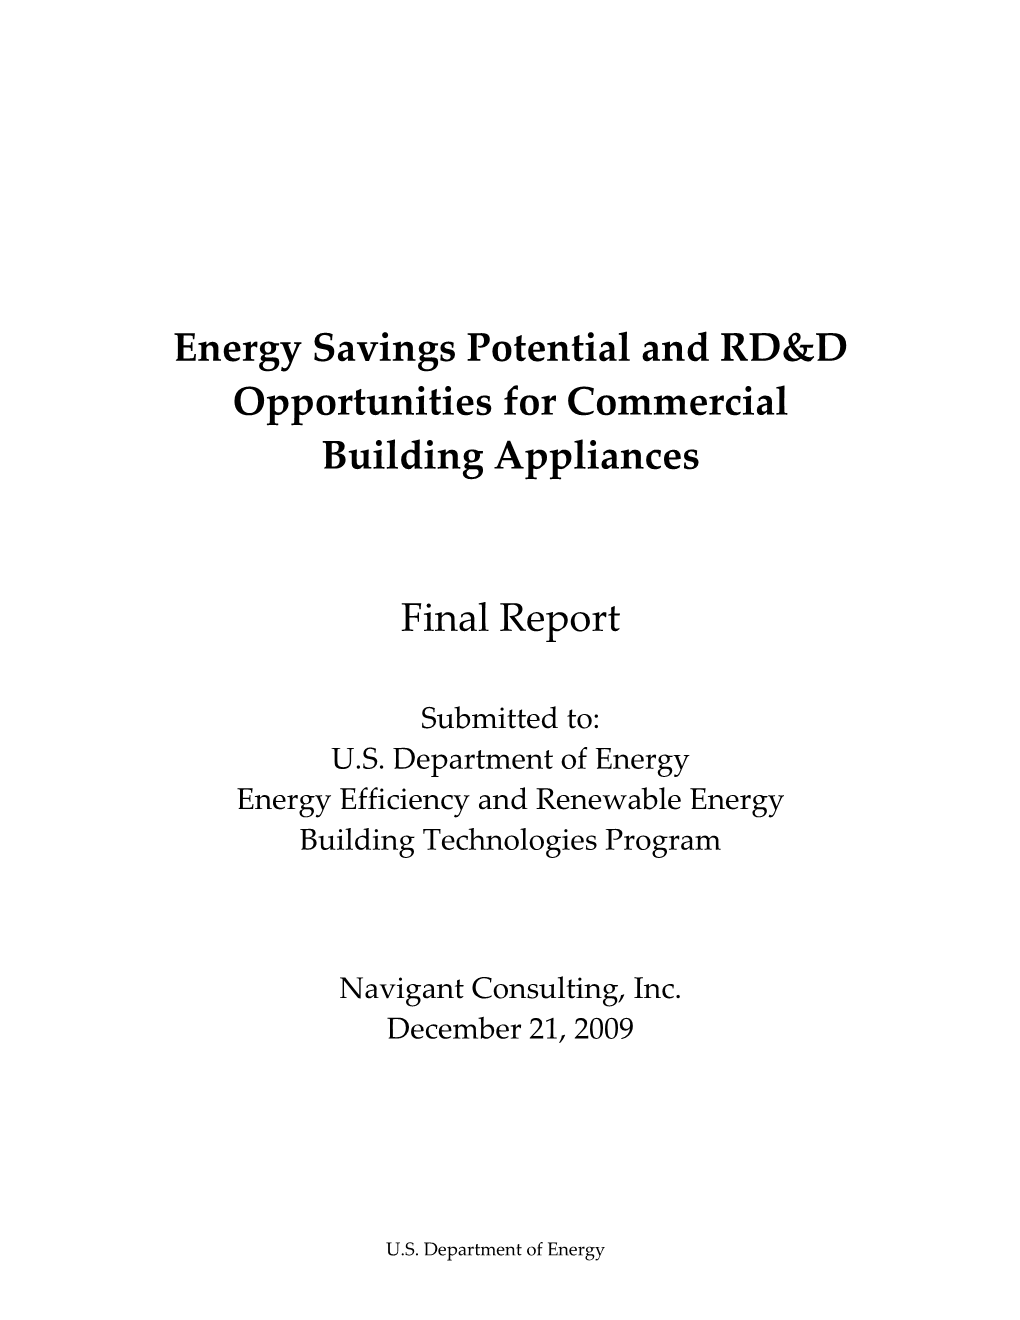 Energy Savings Potential and RD&D Opportunities for Commercial